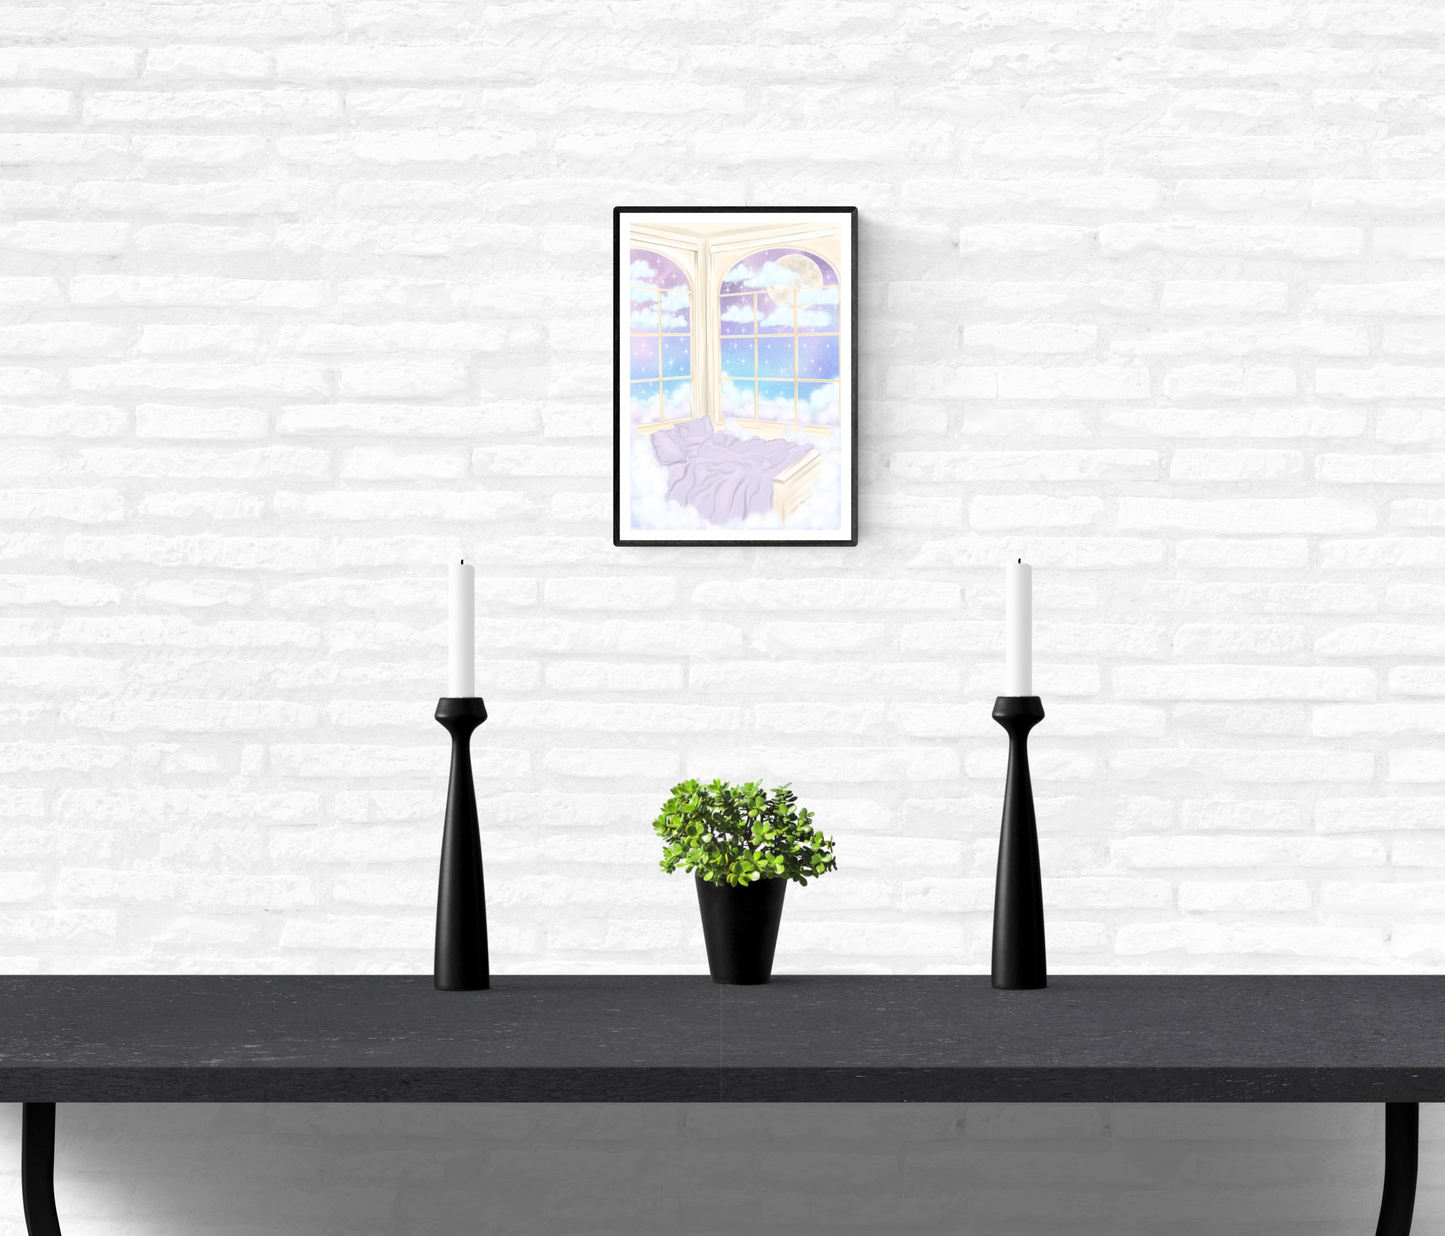 A Room For Dreaming • Wall Art Print